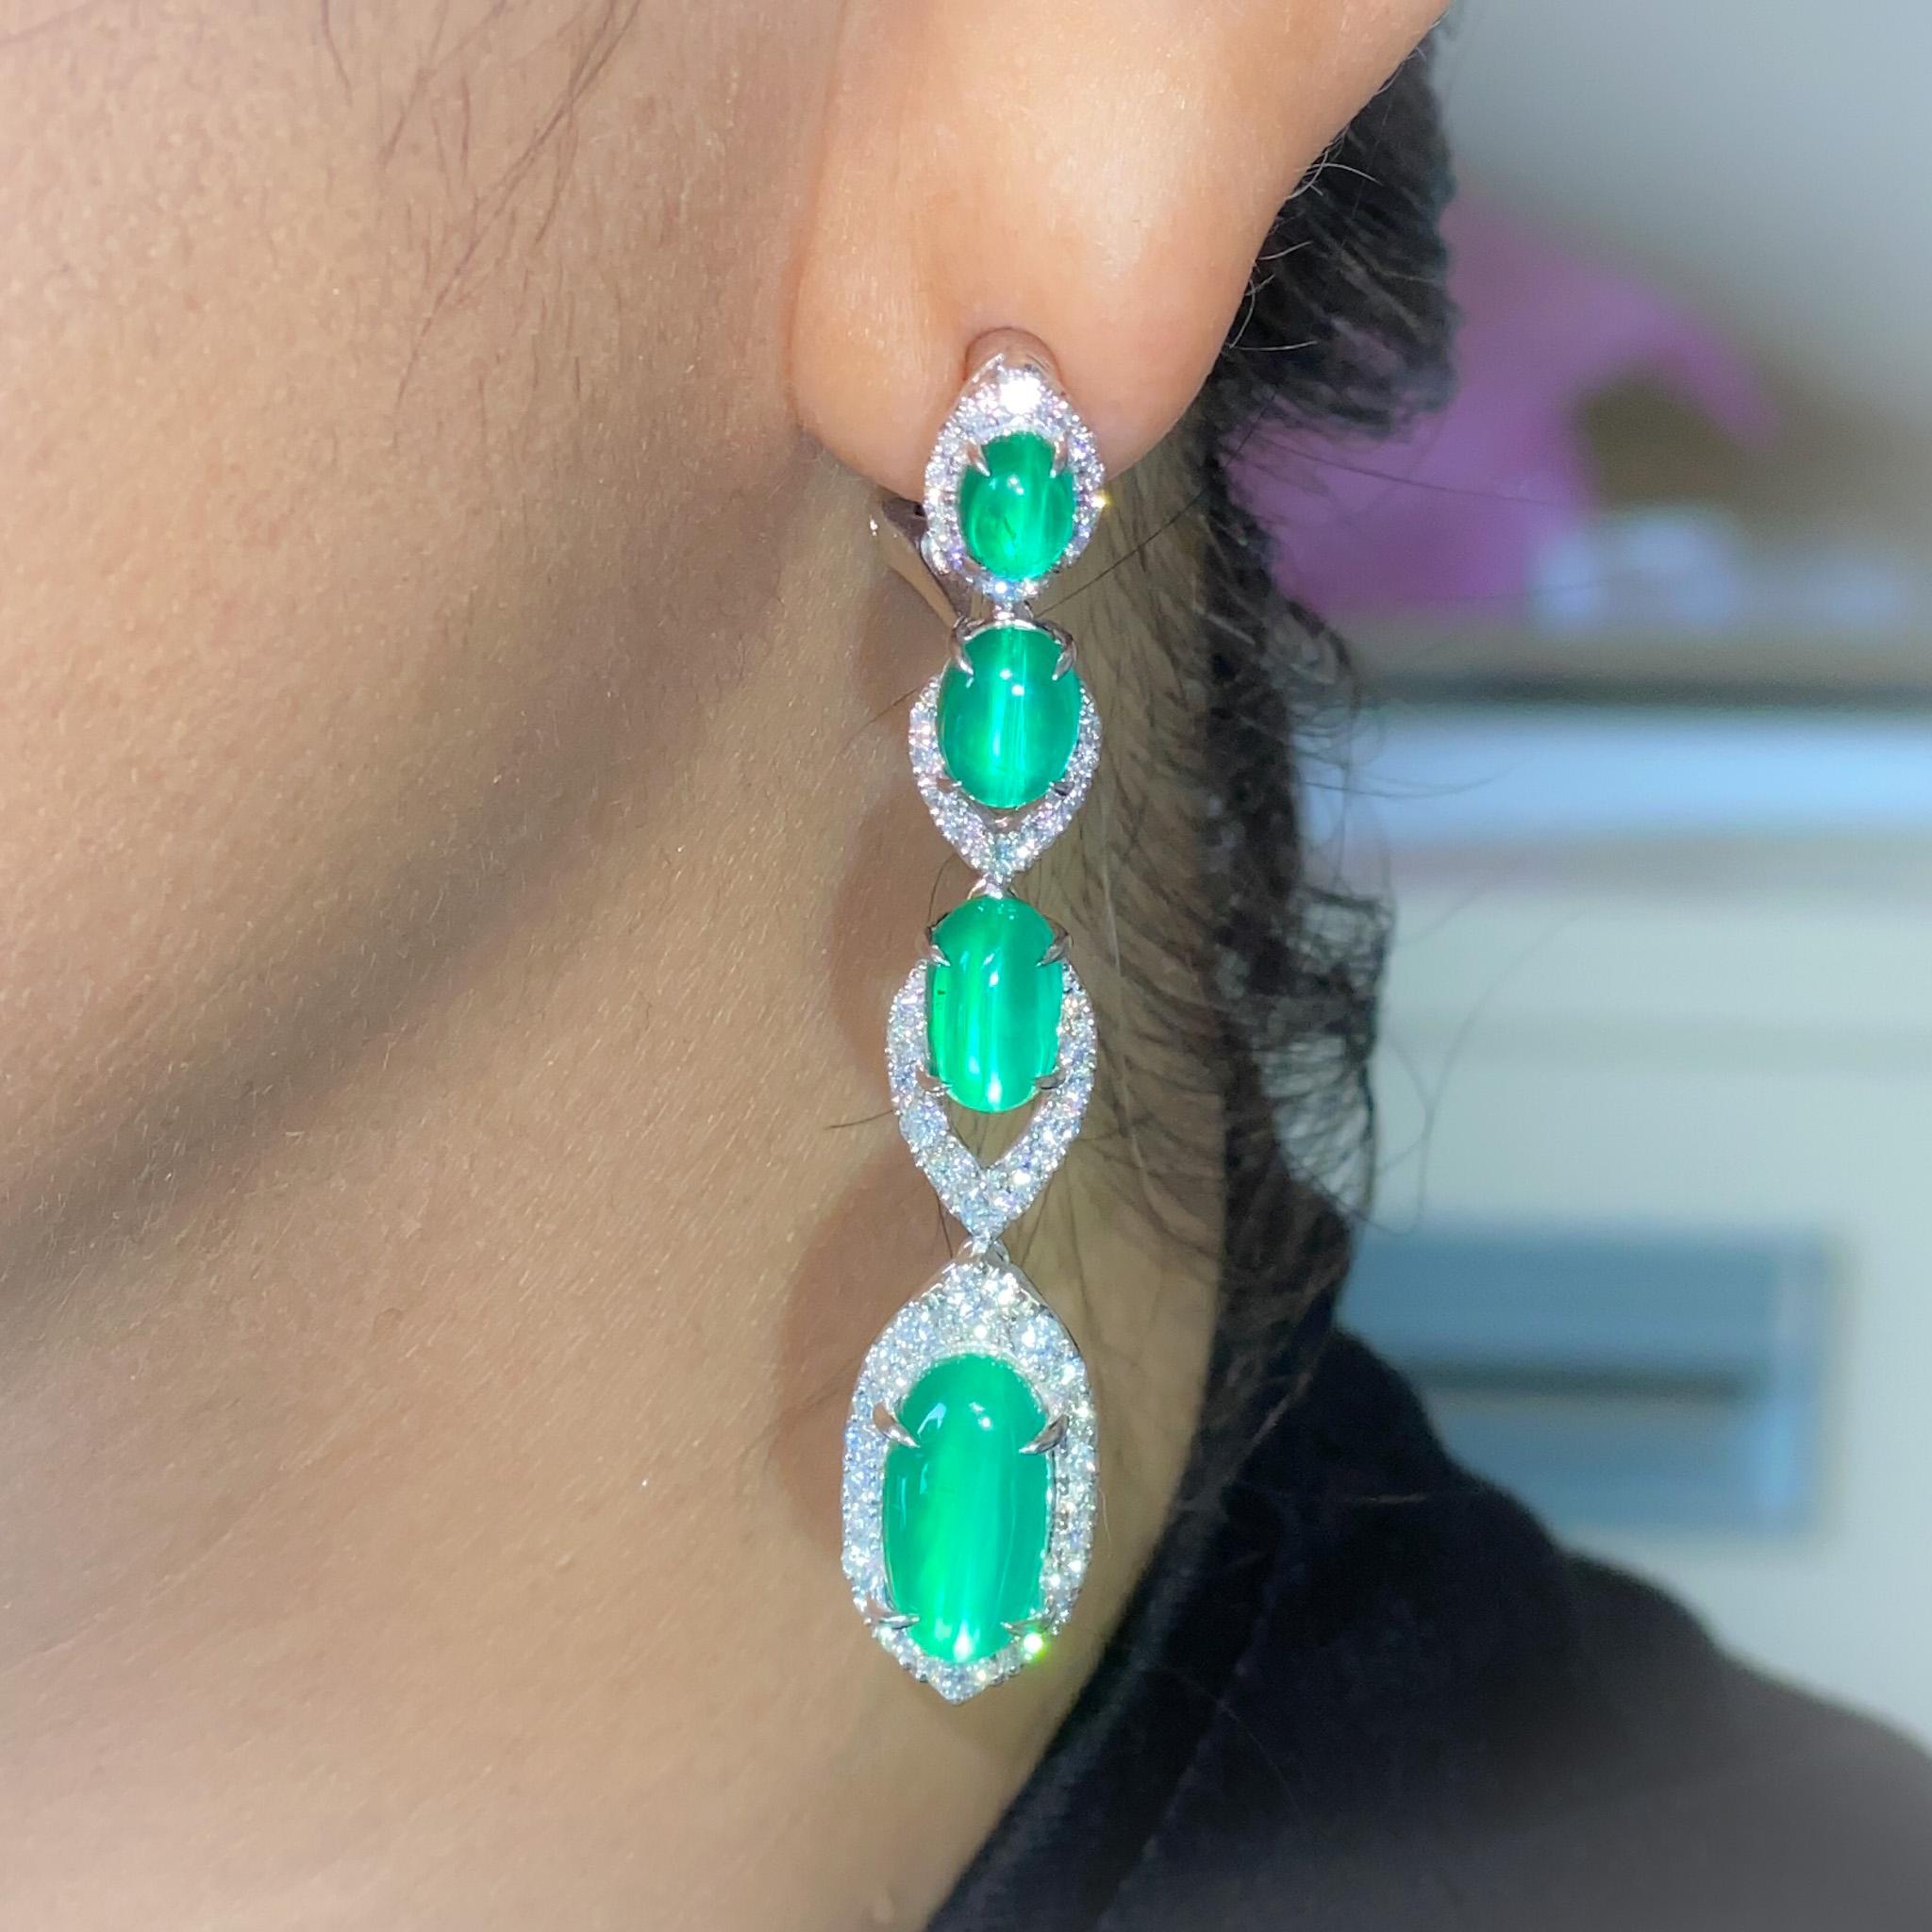 This beautiful, Cat's eye emeralds are an extremely rare occurrence in nature and are sought after by collectors for their uniqueness.
CGL Certified 5.969 & 5.745 ct Emerald Cat's Eye earrings with 1.74/1.74ct diamond around them.